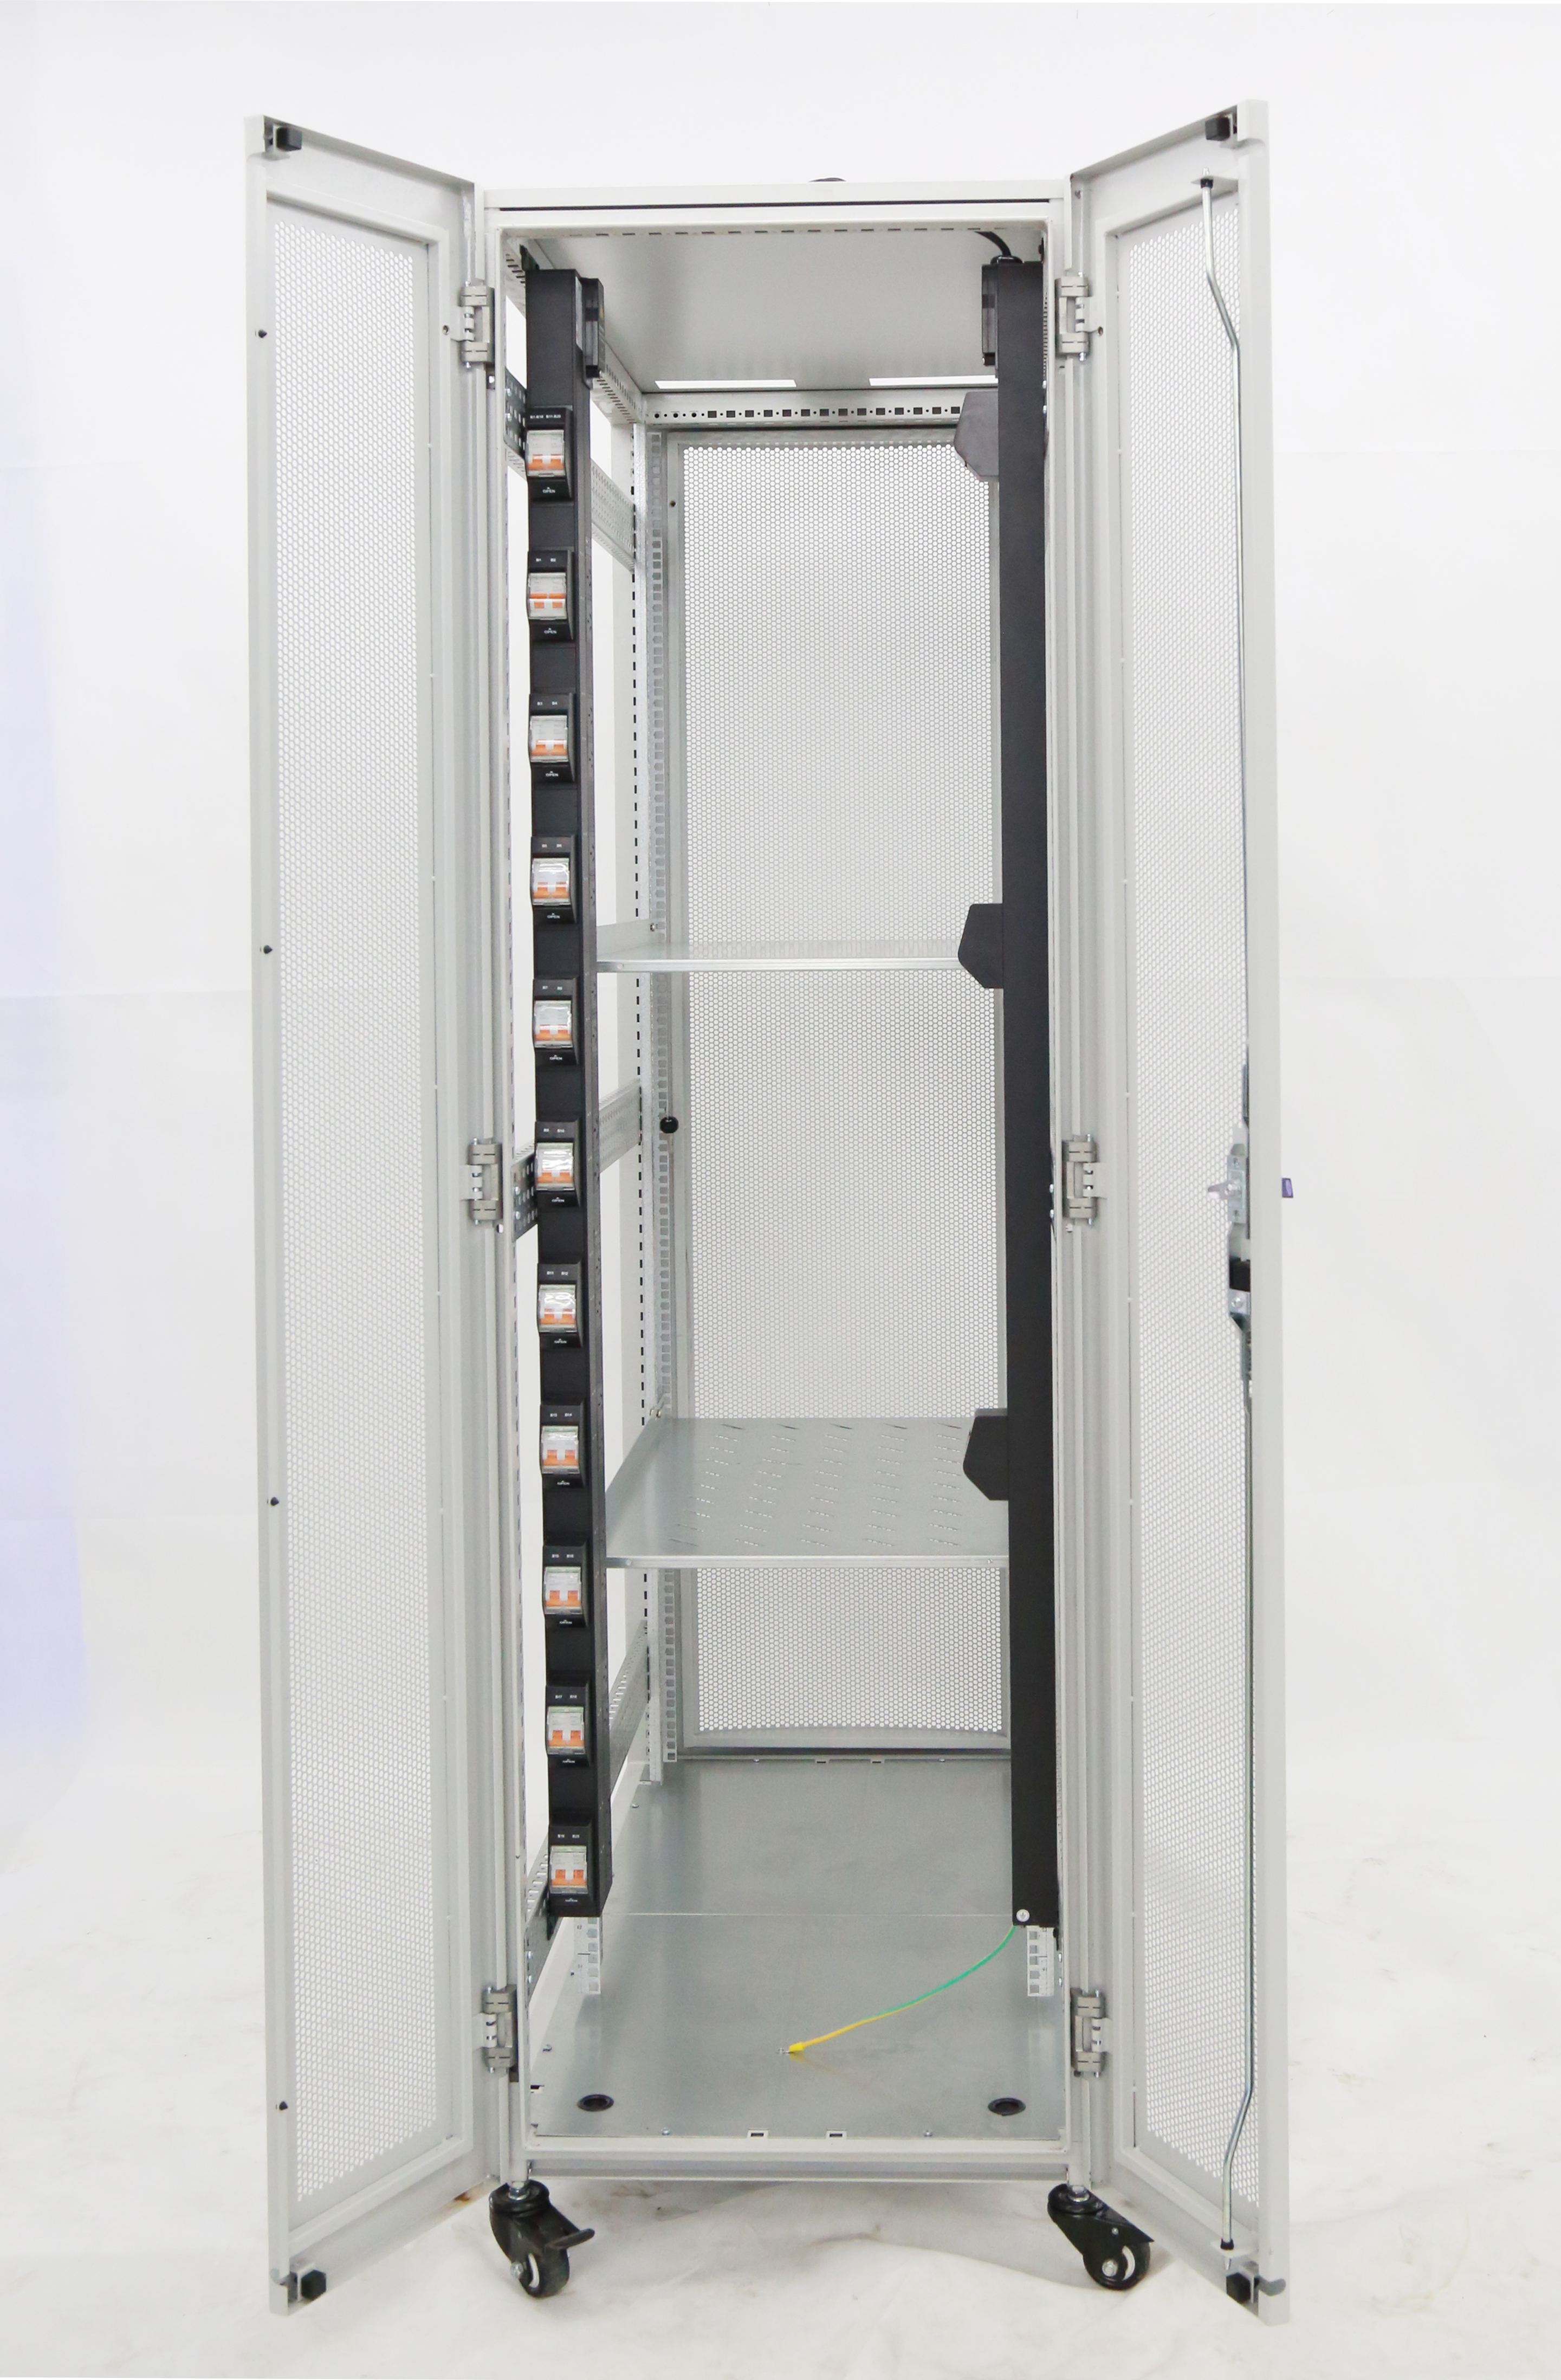  ZTmm HS Series Standing Network Rack -White